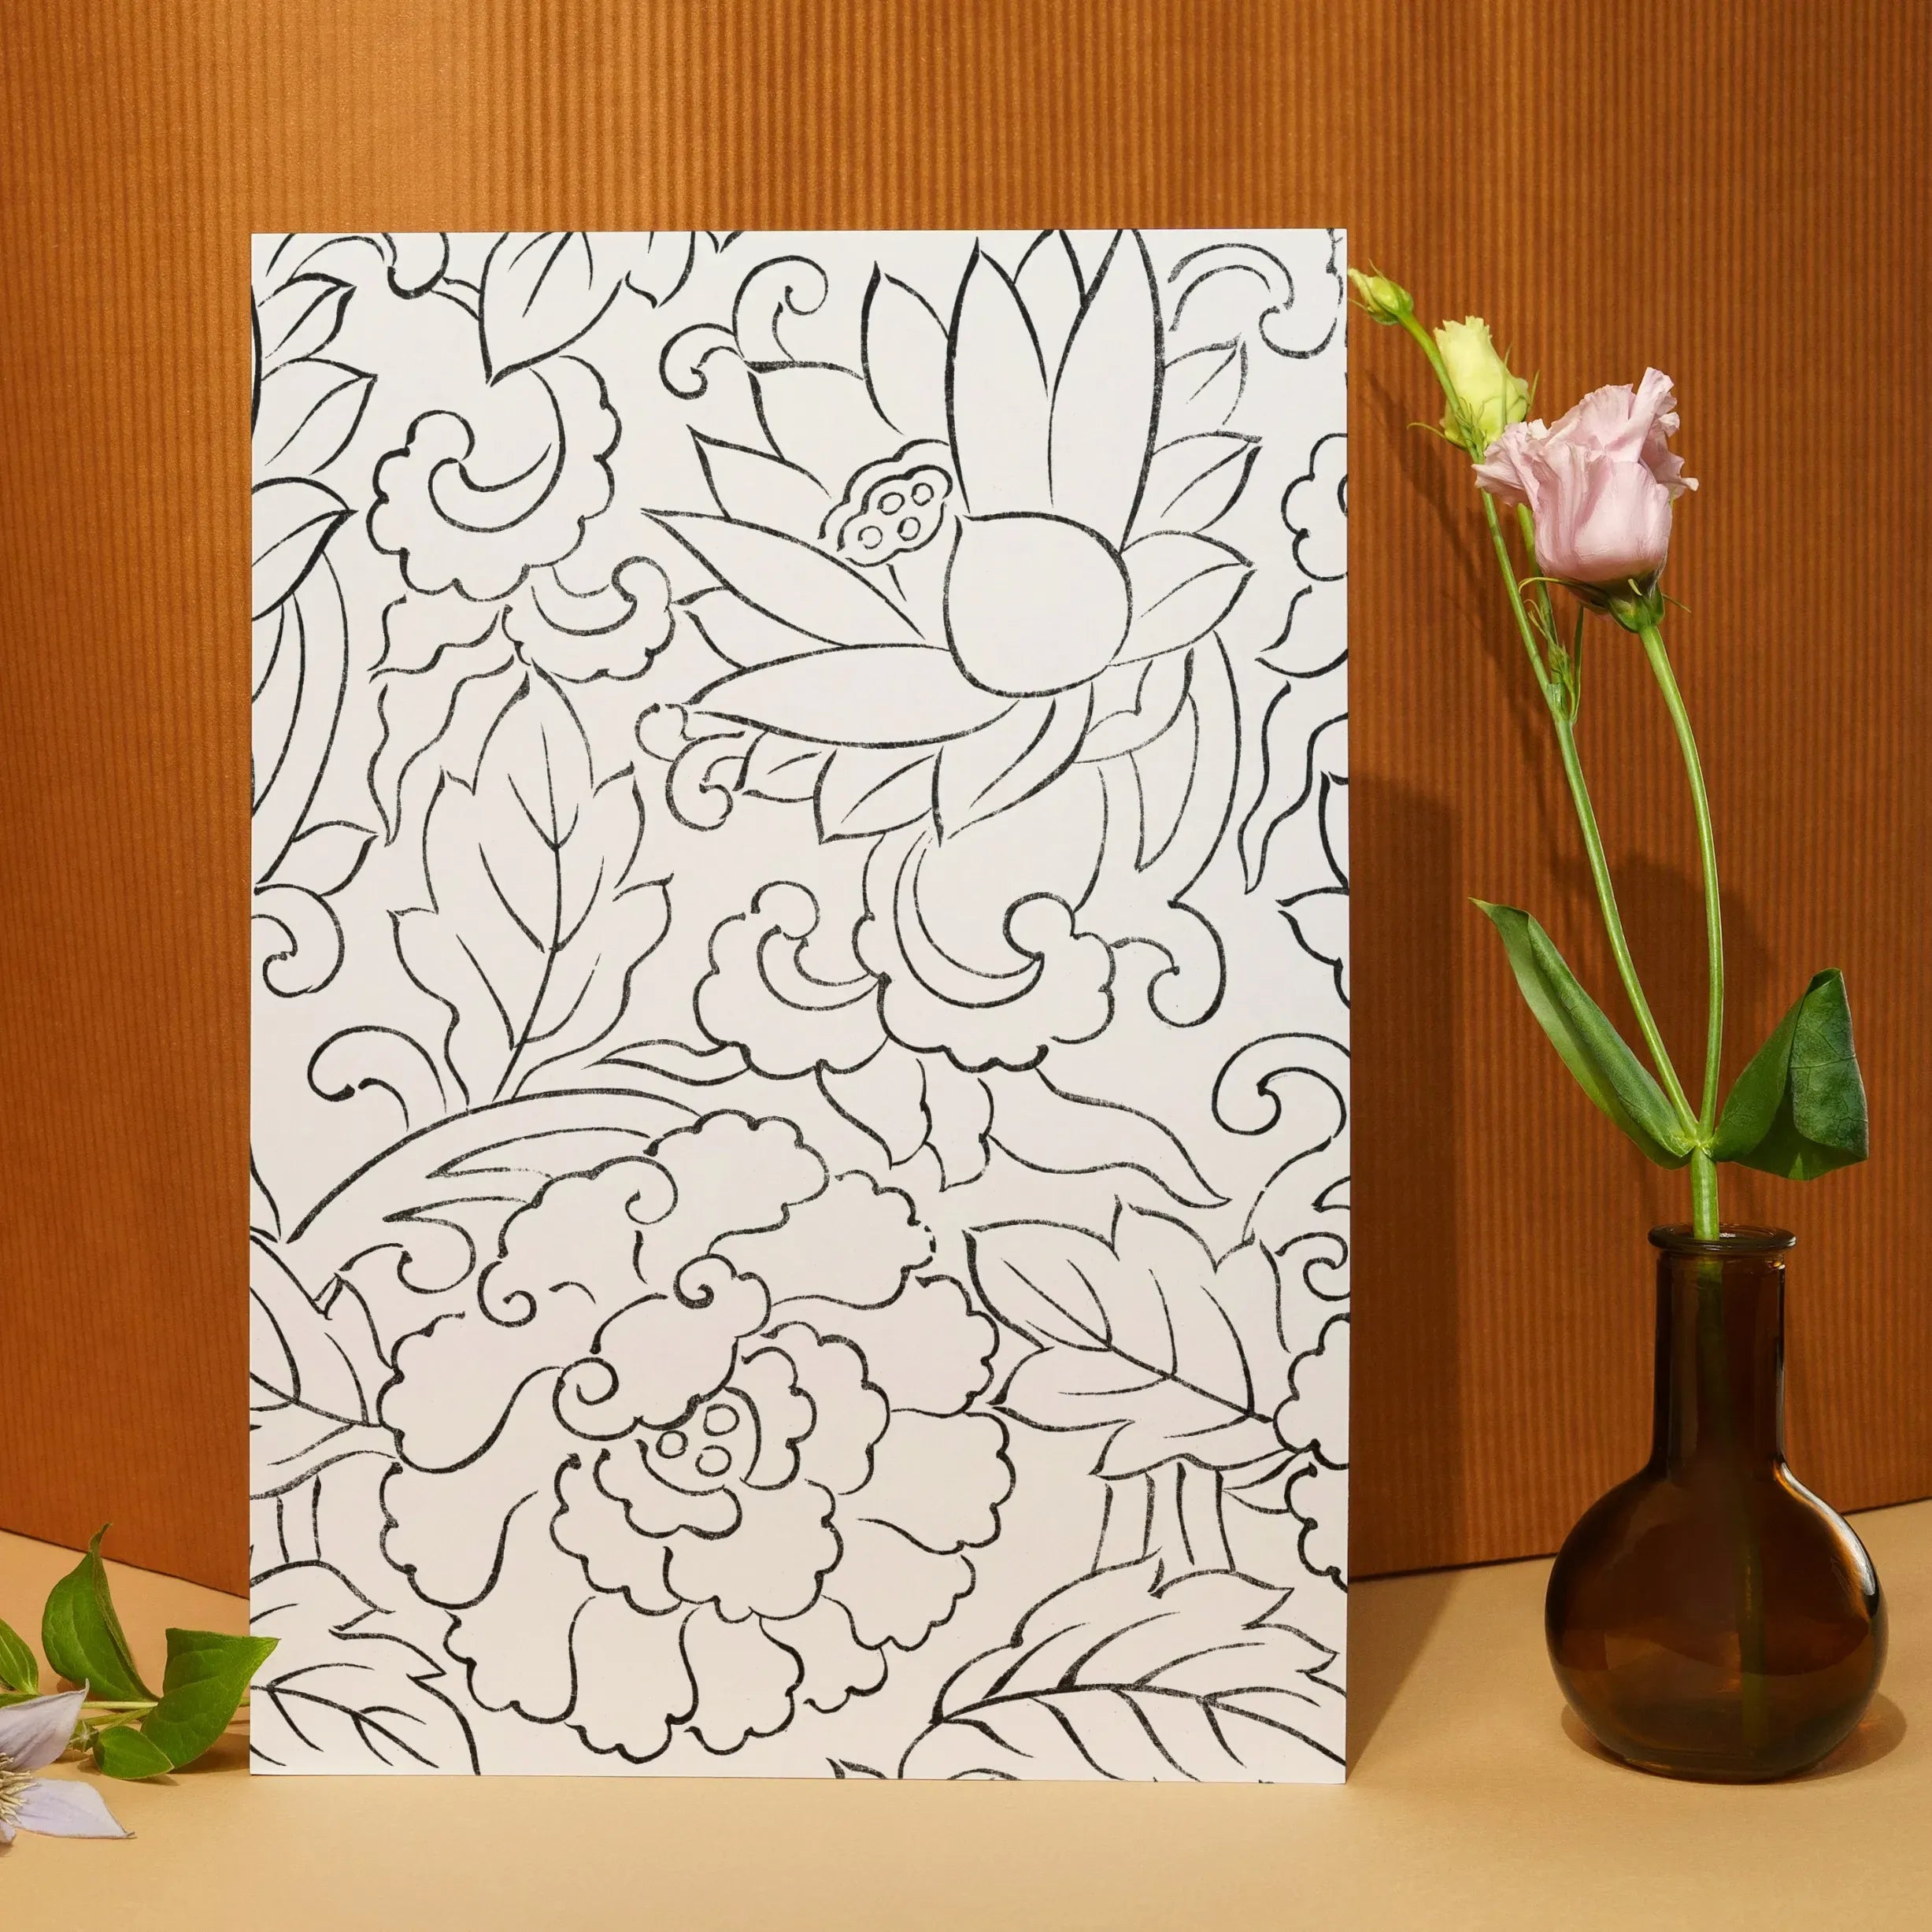 Black & White Floral Woodblock Print By Taguchi Tomoki Greeting Card - A5 Portrait / 1 Card - Notebooks & Notepads